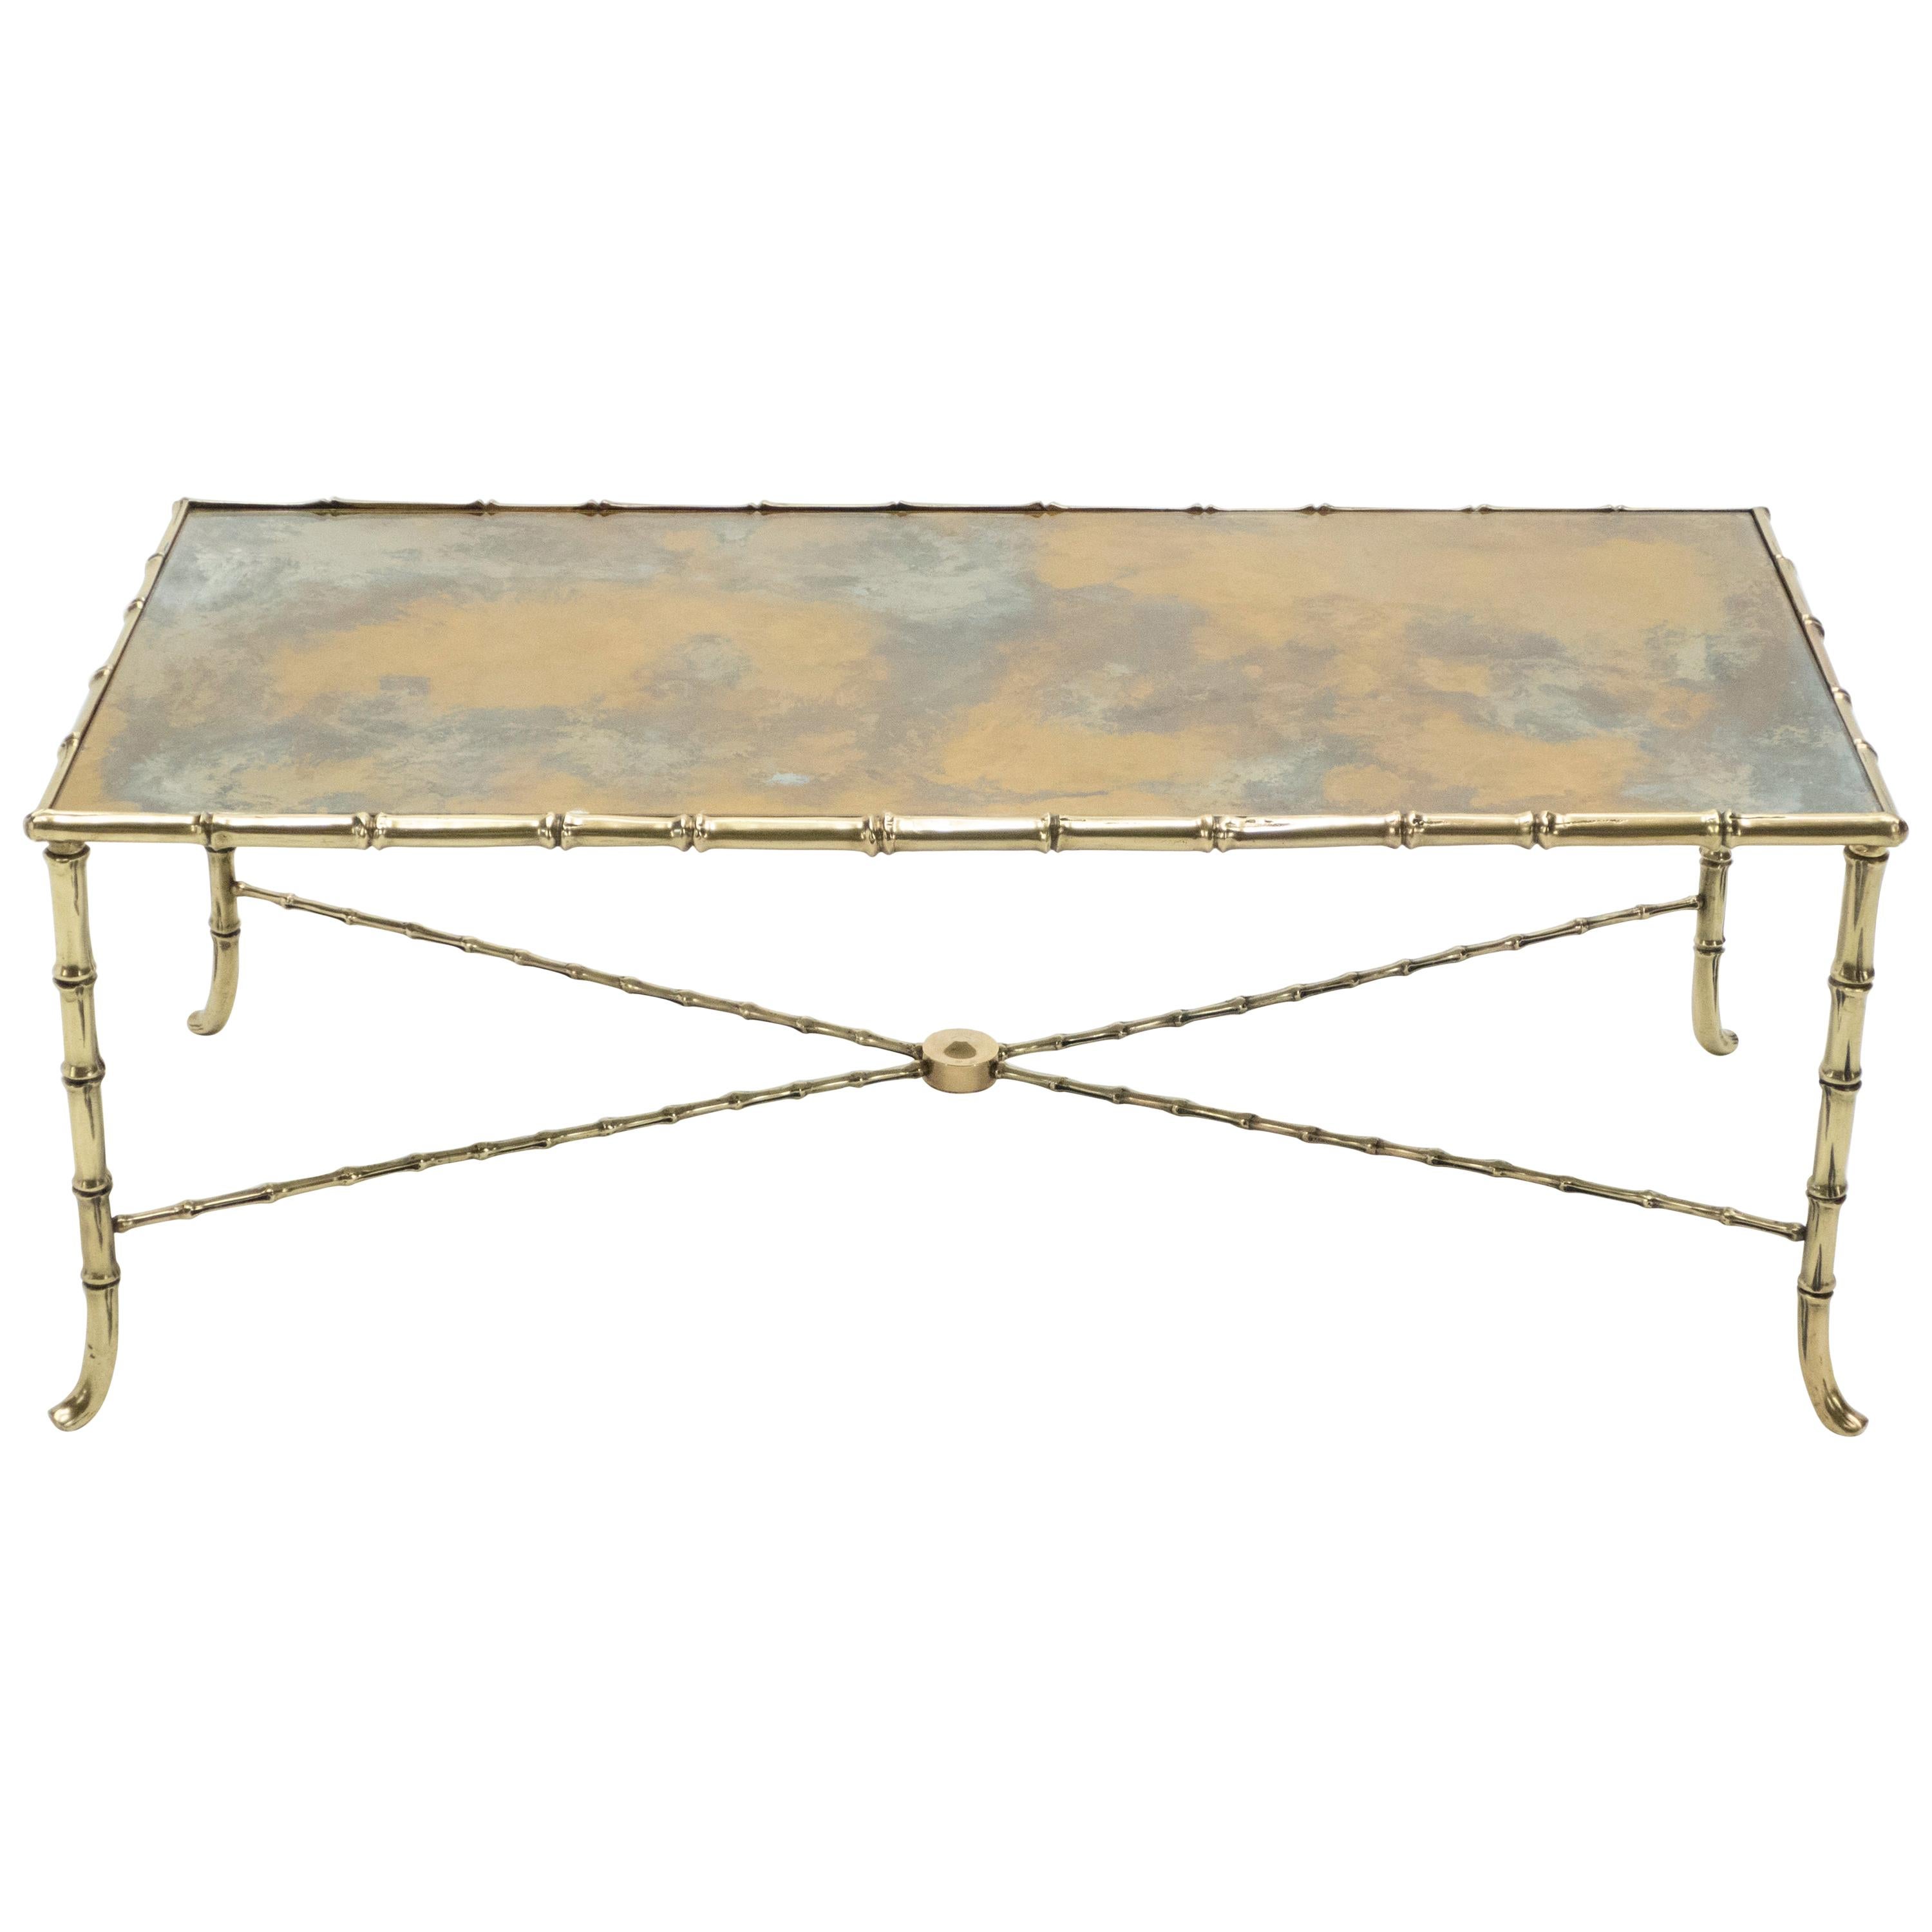 French Maison Jansen Brass Bamboo Mirrored Coffee Table, 1960s